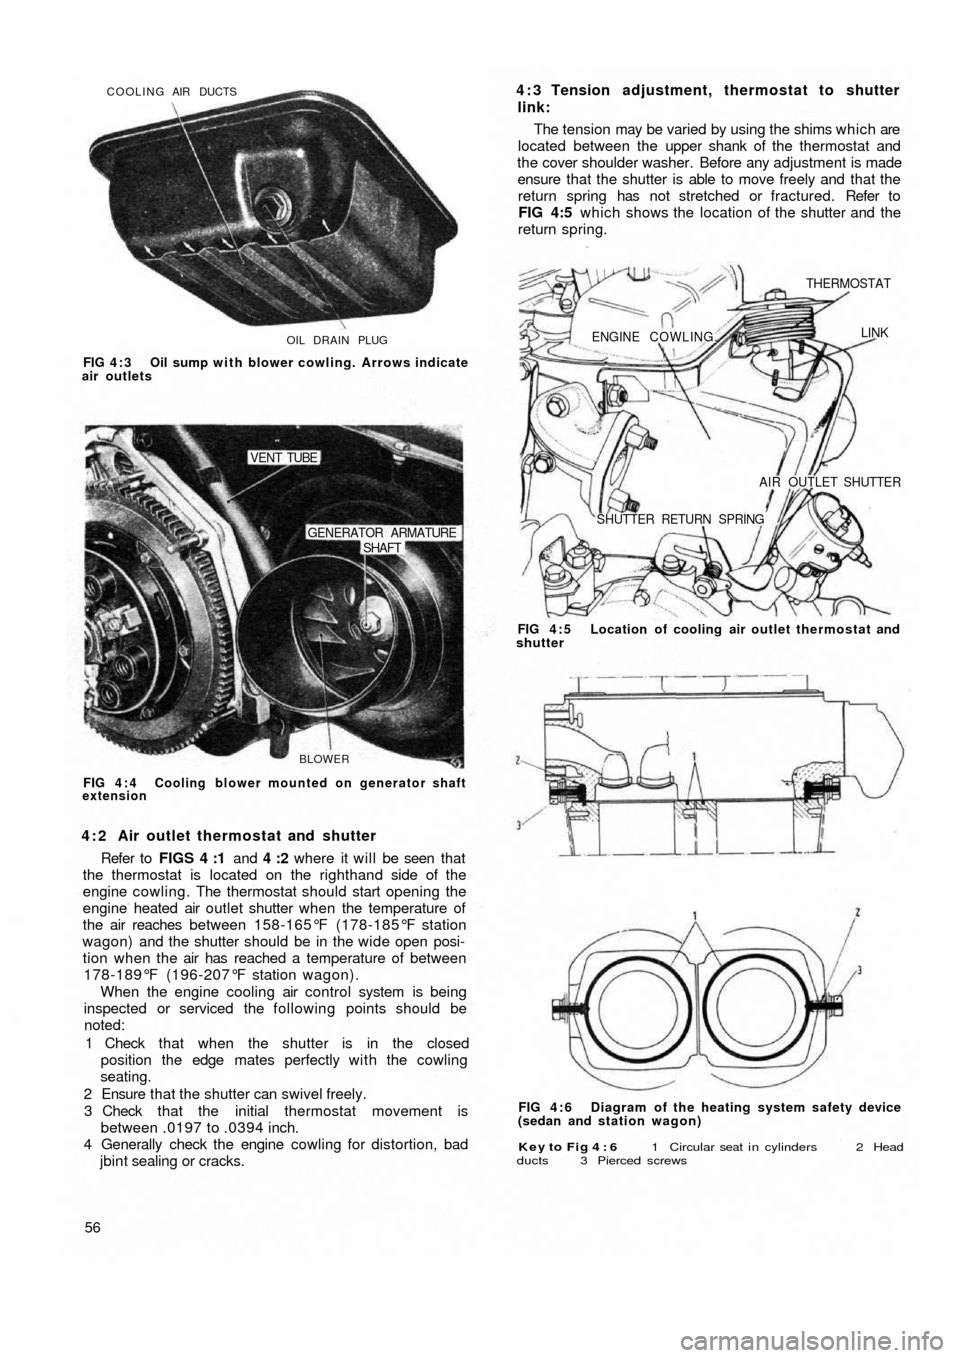 FIAT 500 1957 1.G Owners Manual OIL DRAIN PLUG COOLING AIR DUCTS
FIG 4 : 3  Oil sump with blower cowling. Arrows indicate
air outlets
BLOWER
SHAFT GENERATOR ARMATURE
VENT TUBE
FIG 4 : 4  Cooling blower mounted on generator shaft
ext